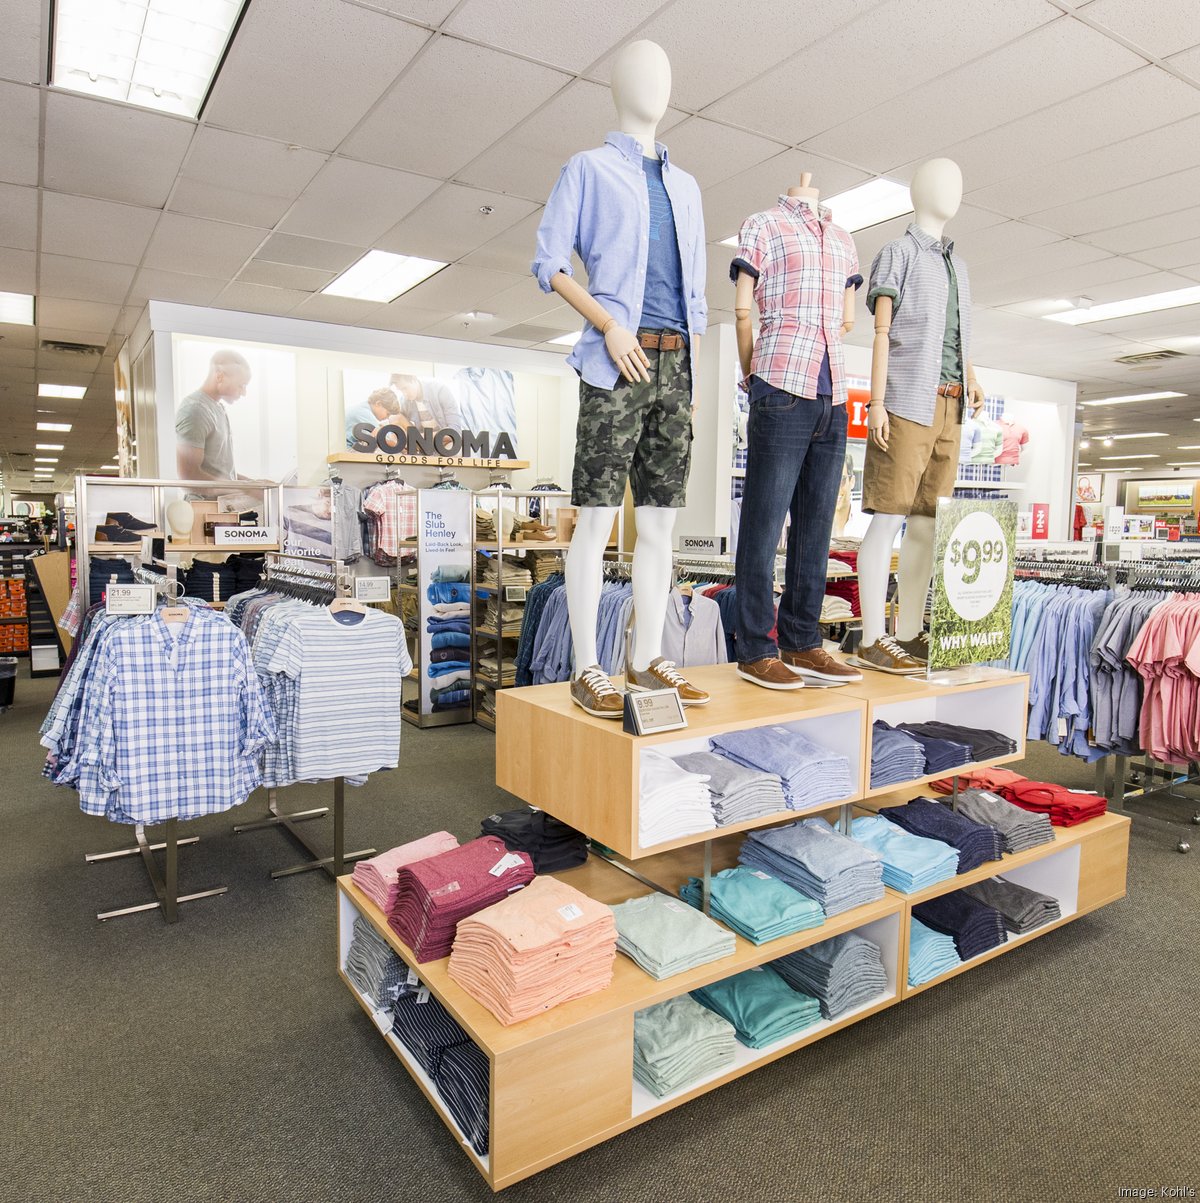 Kohl's revamps Sonoma, its largest private label - Milwaukee